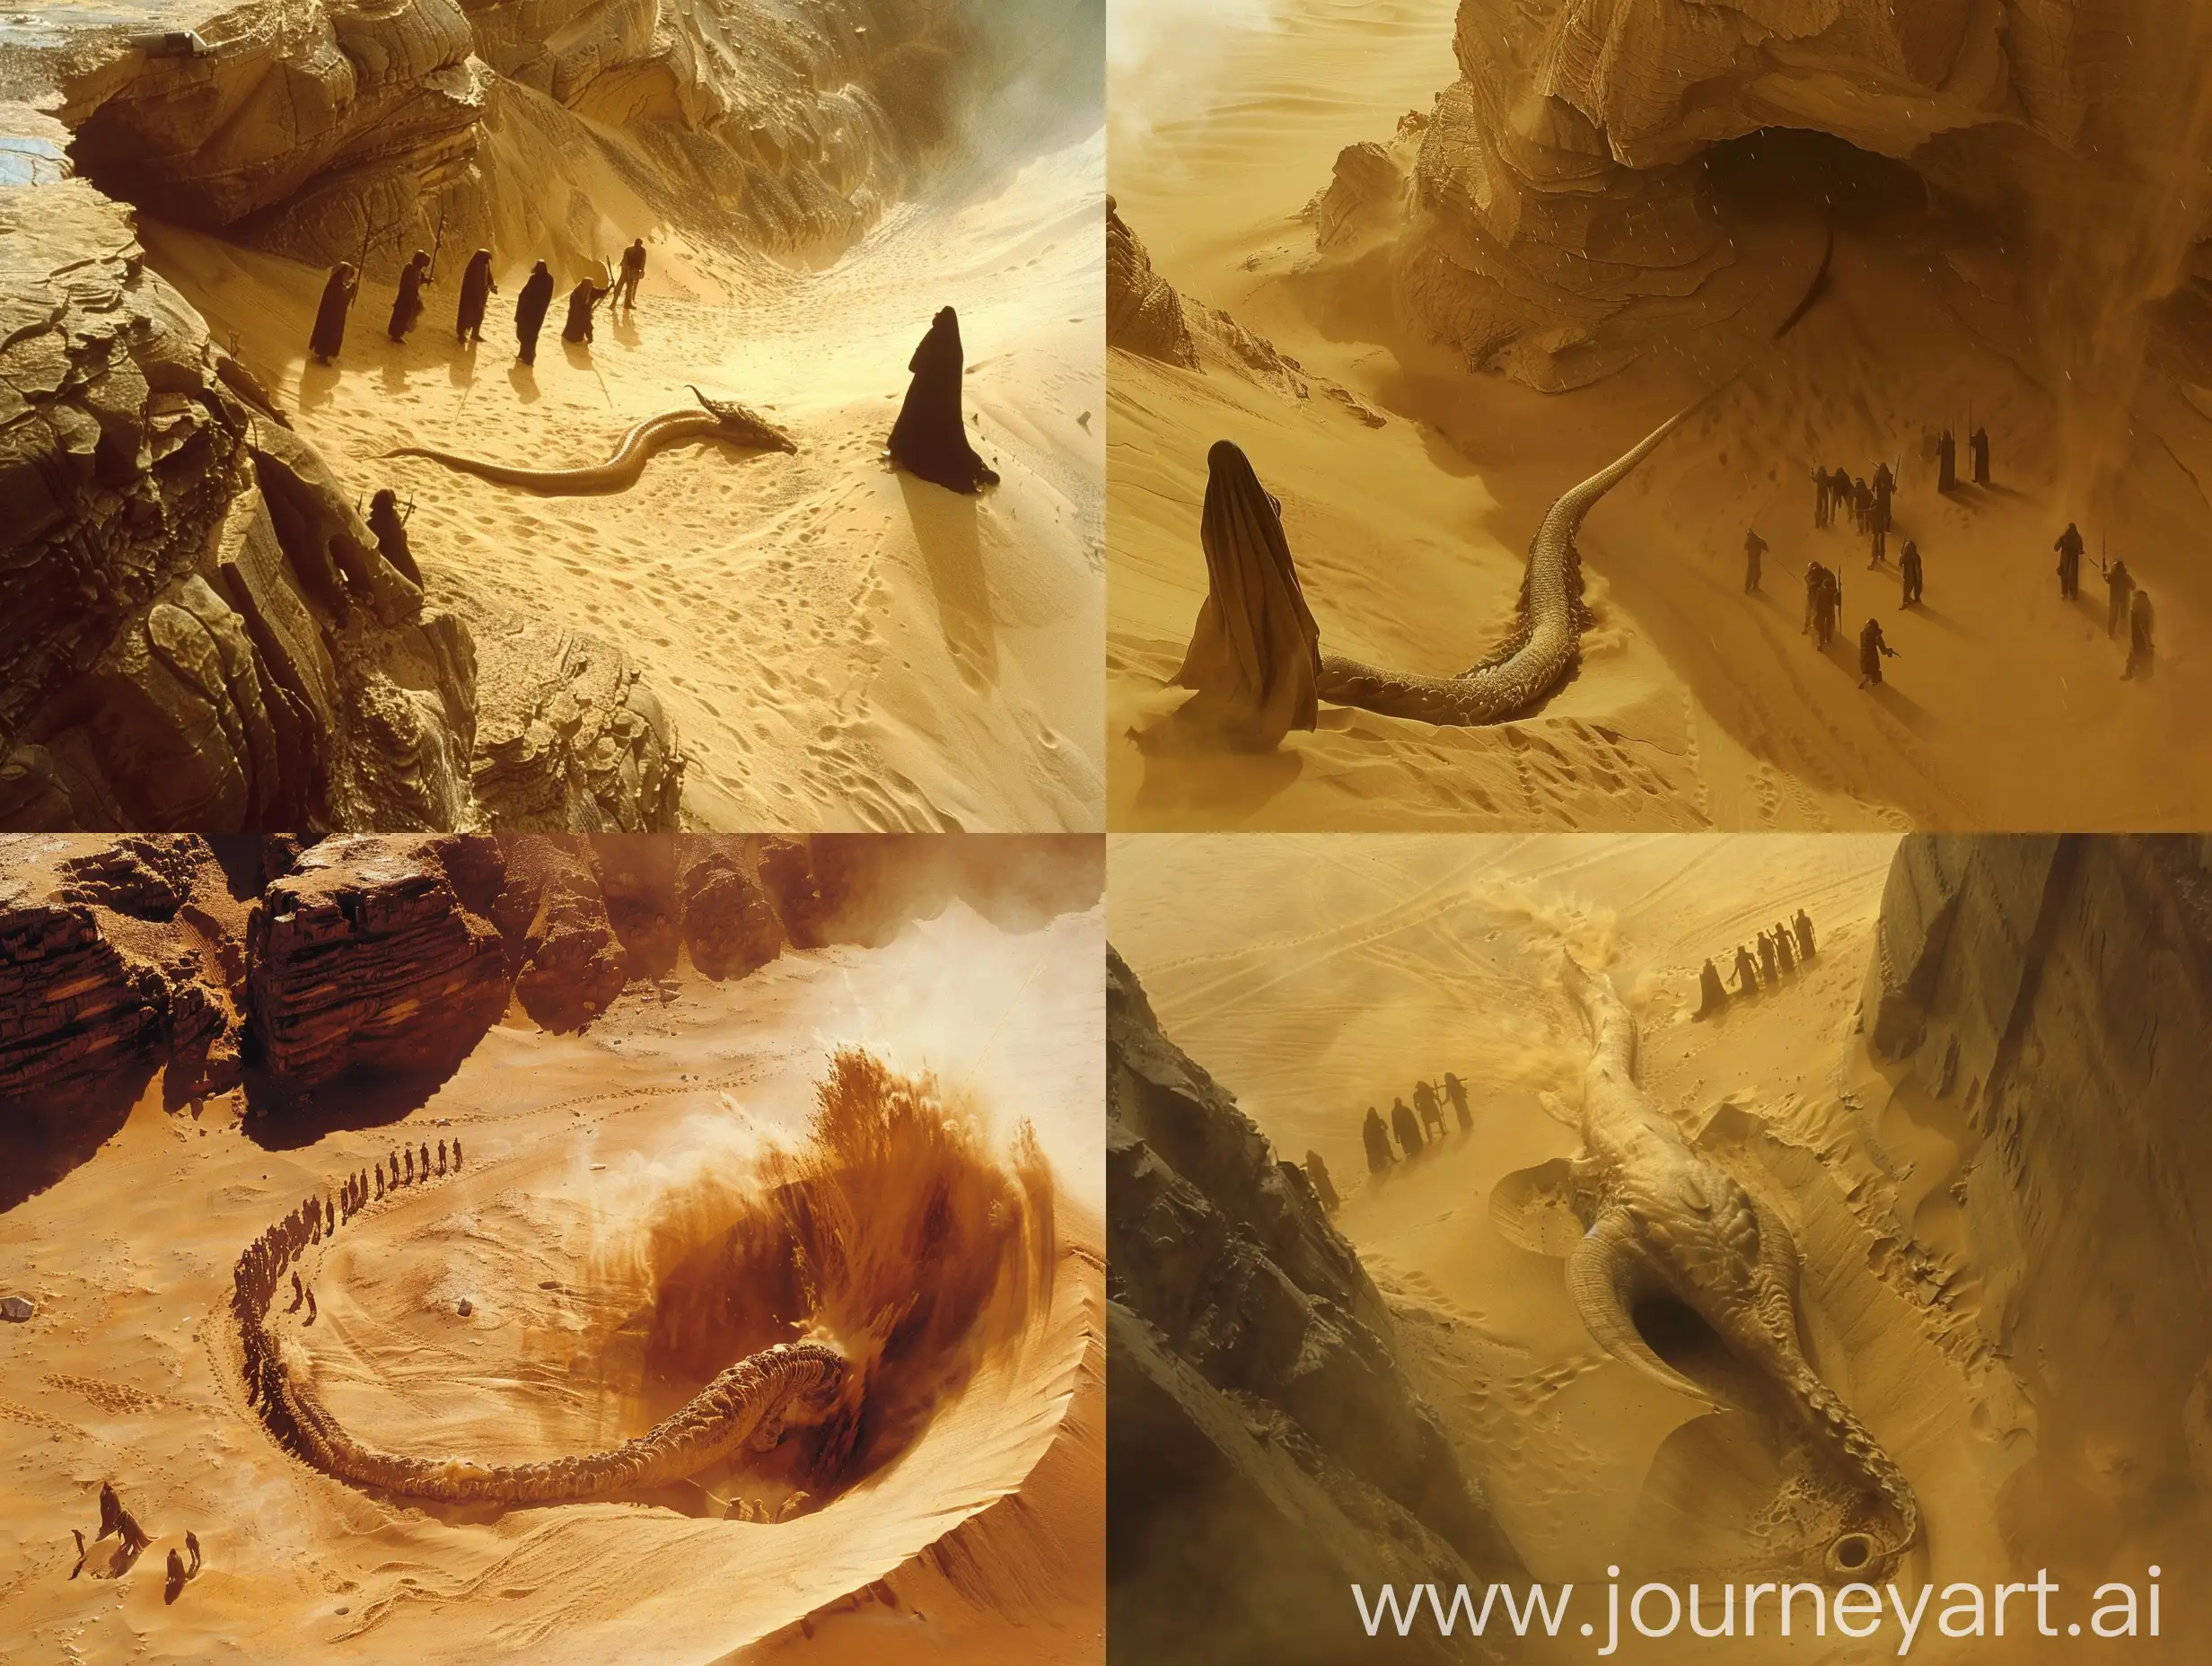 planet arrakis of book dune, overhead shot of the deep desert, a sandworm is emerging from the sand as a group of fremen people witness the scene in the distance